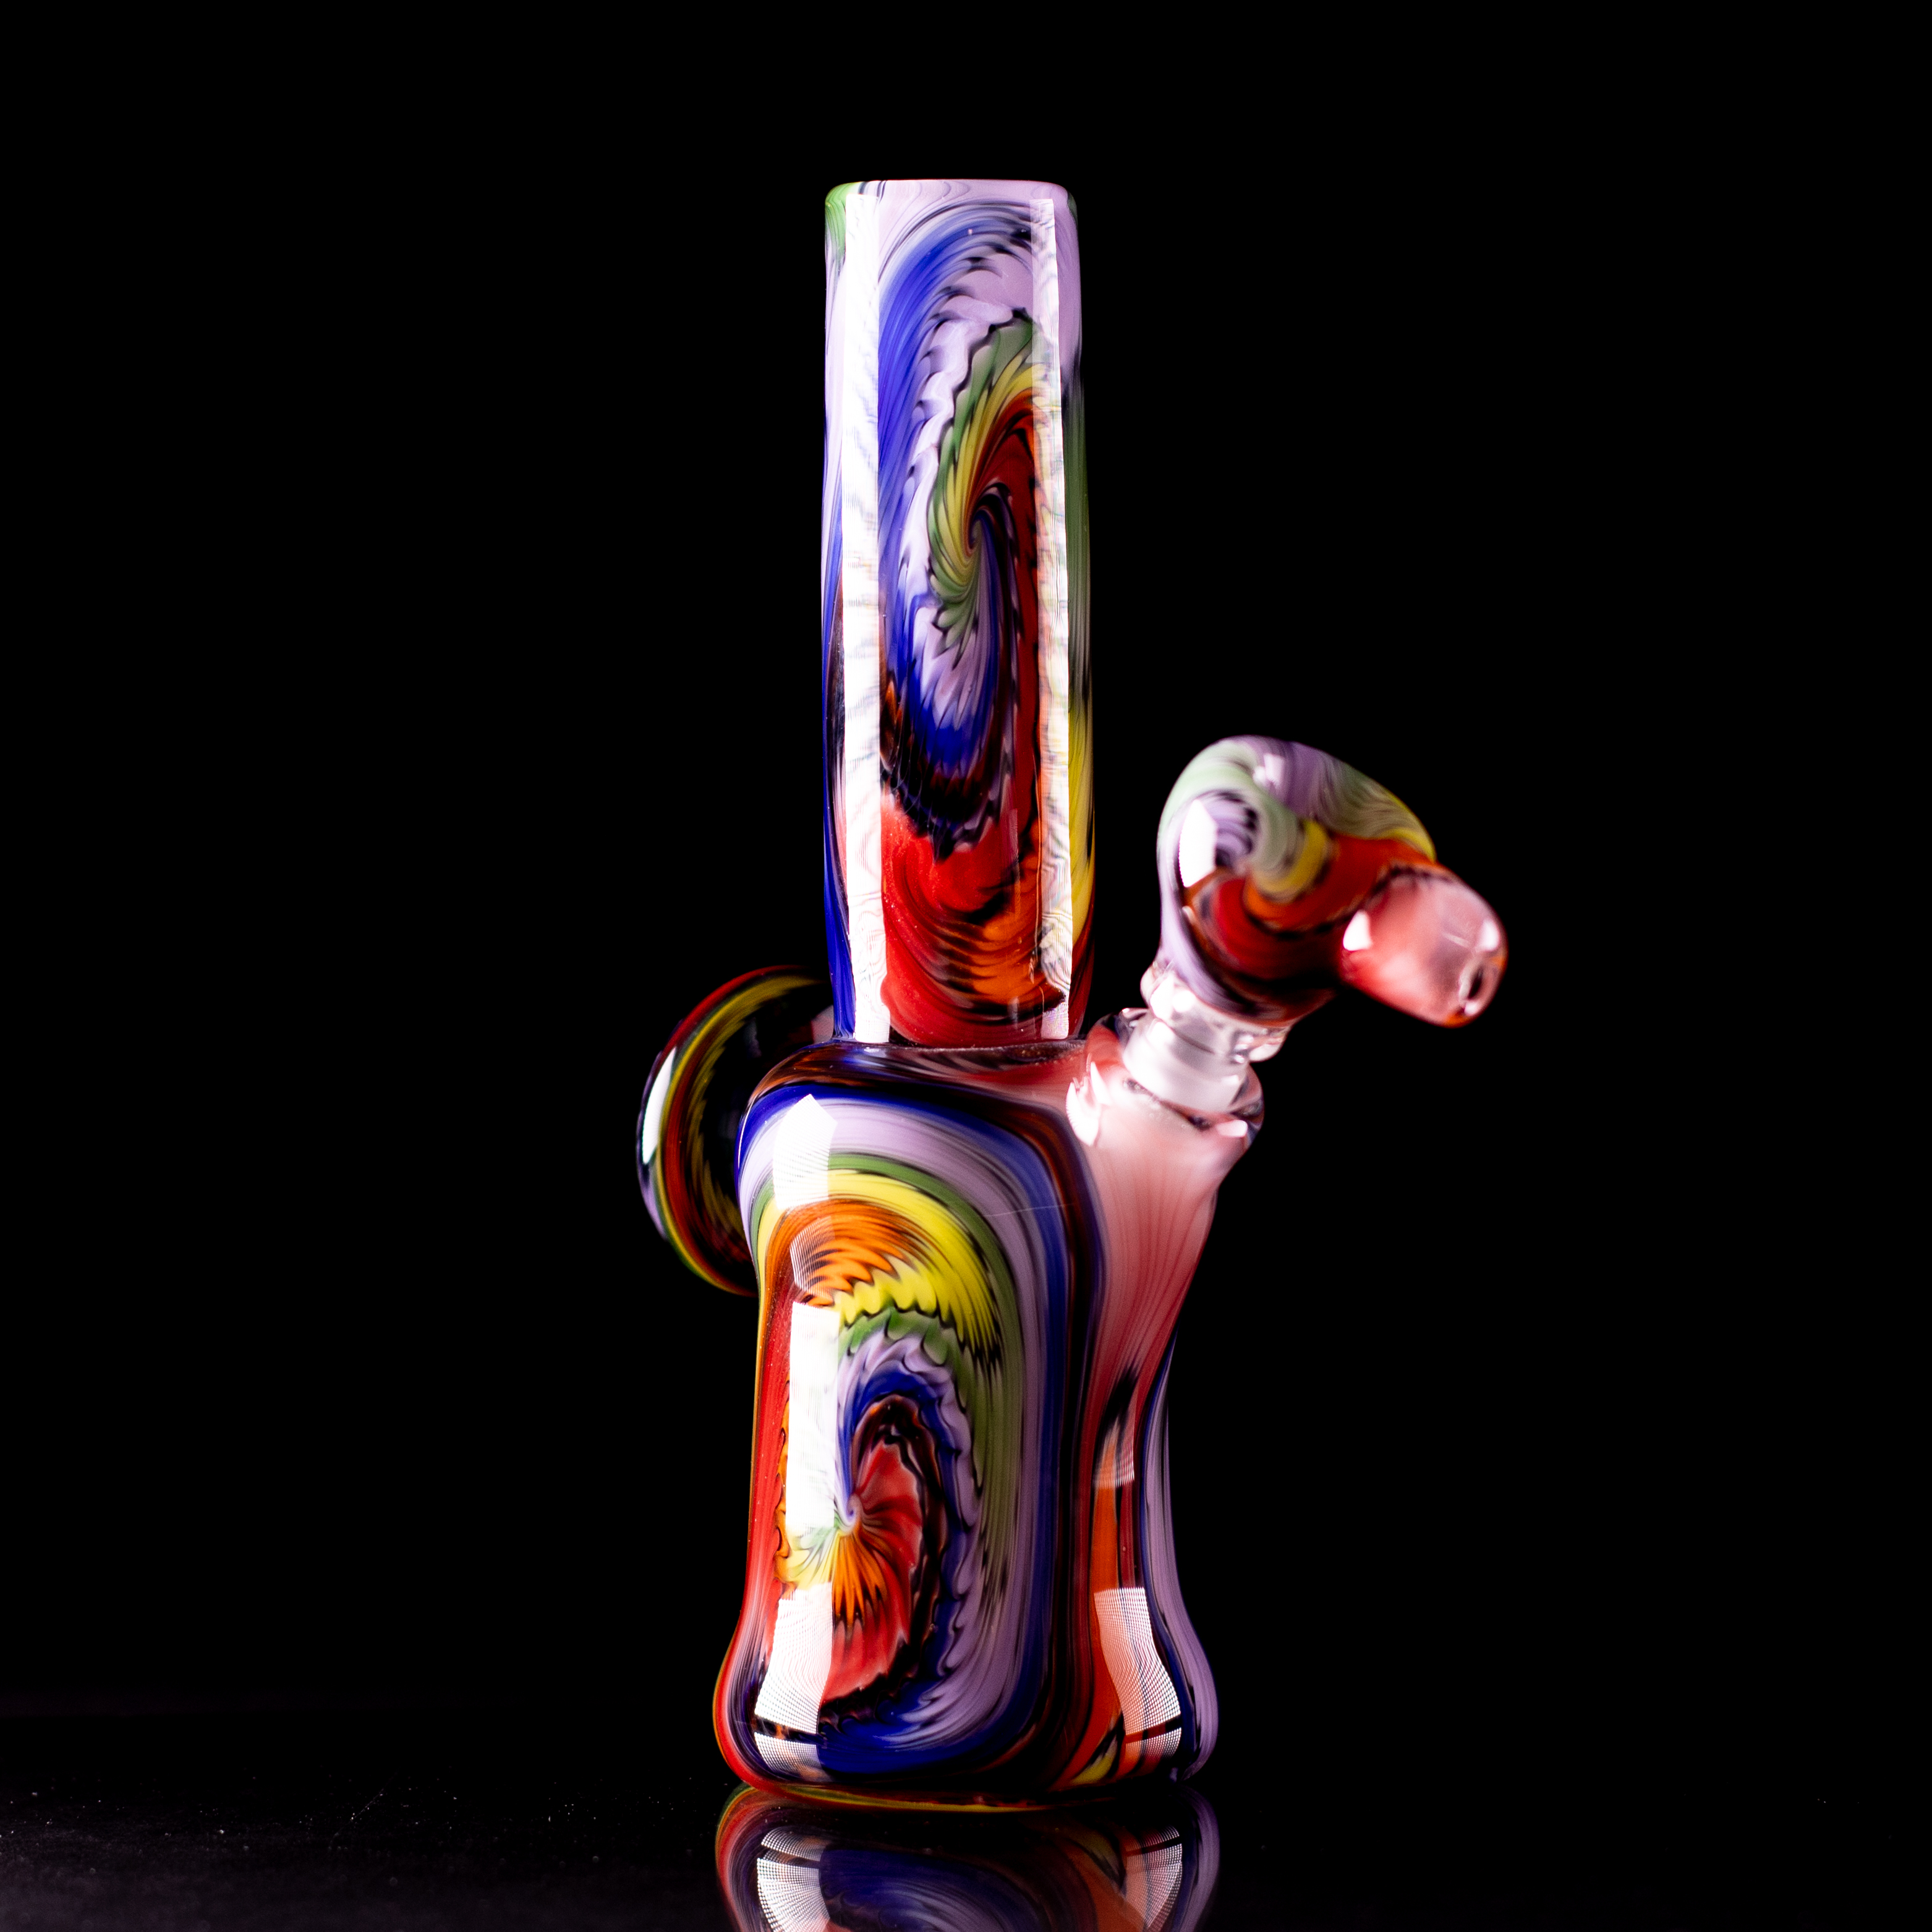 14mm Rainbow Heady Tube with Downstem and Bowl